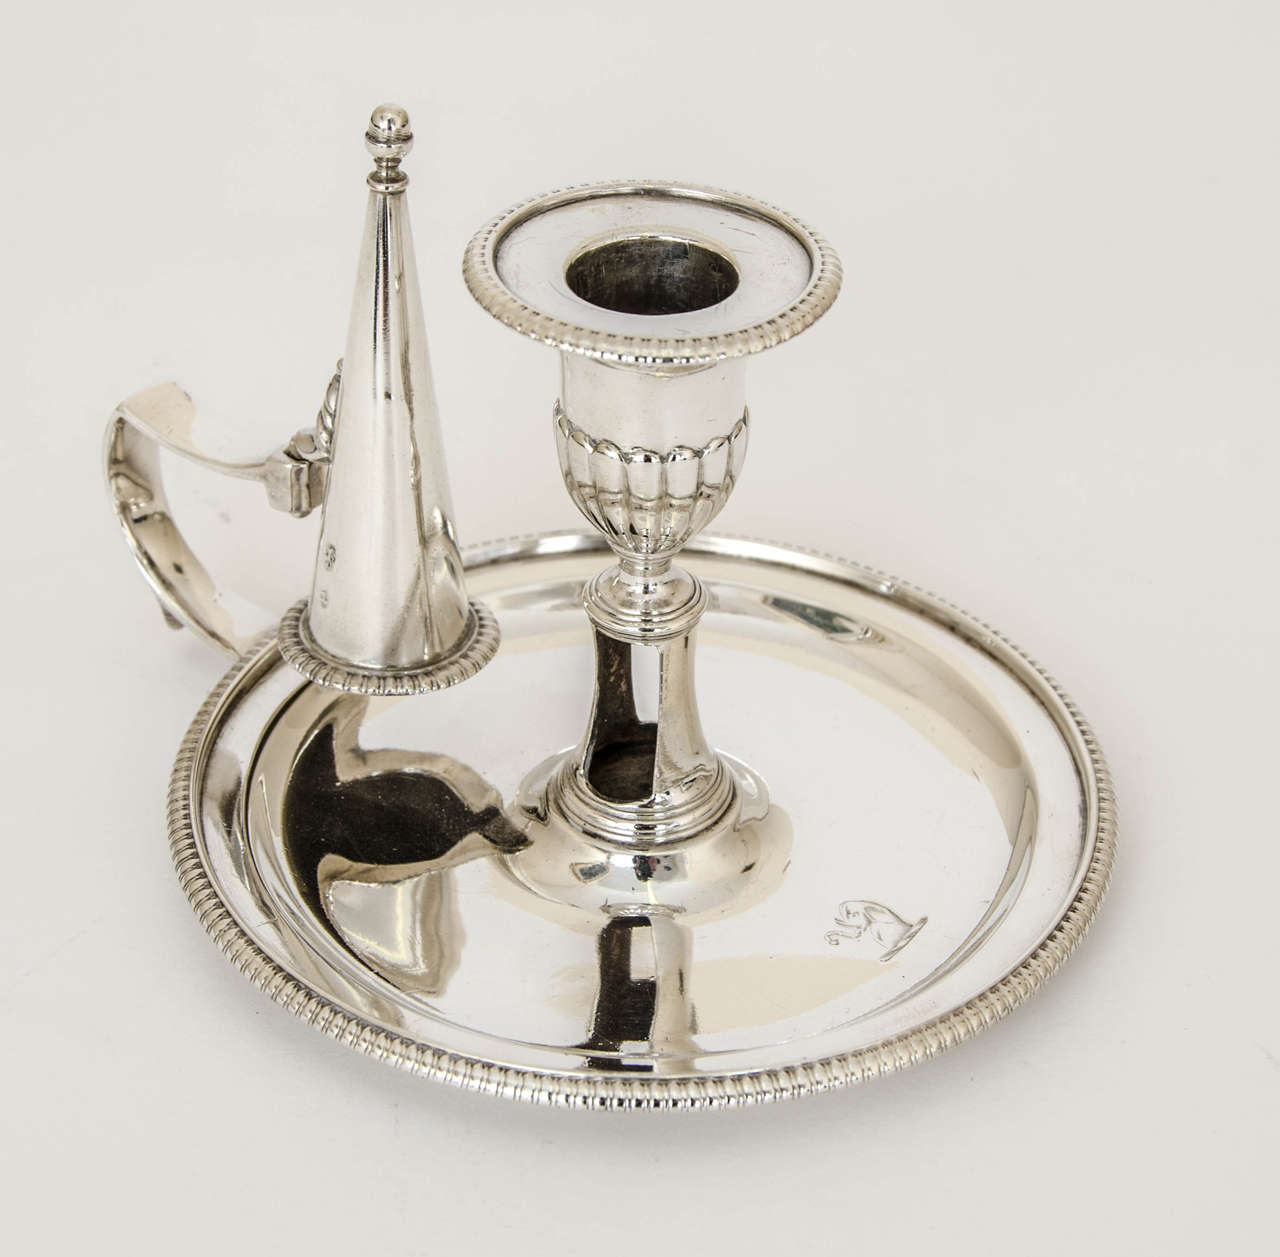 Pair of George III Antique Sterling Silver by Paul Storr in 1799 In Good Condition For Sale In London, GB